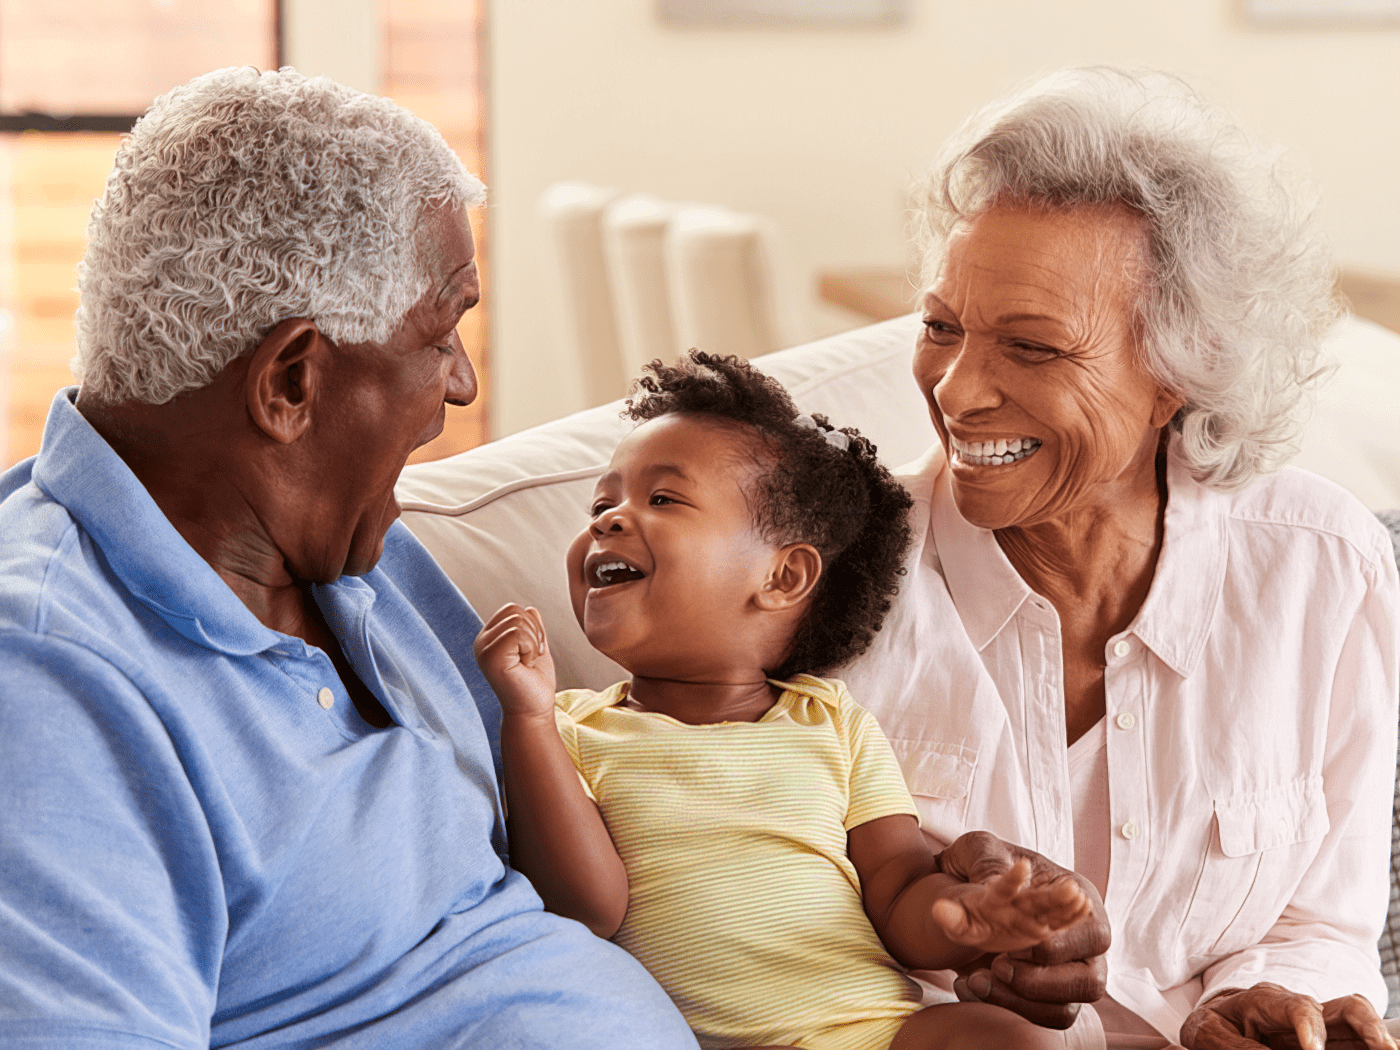 Elderly couple laughing with their grandchild